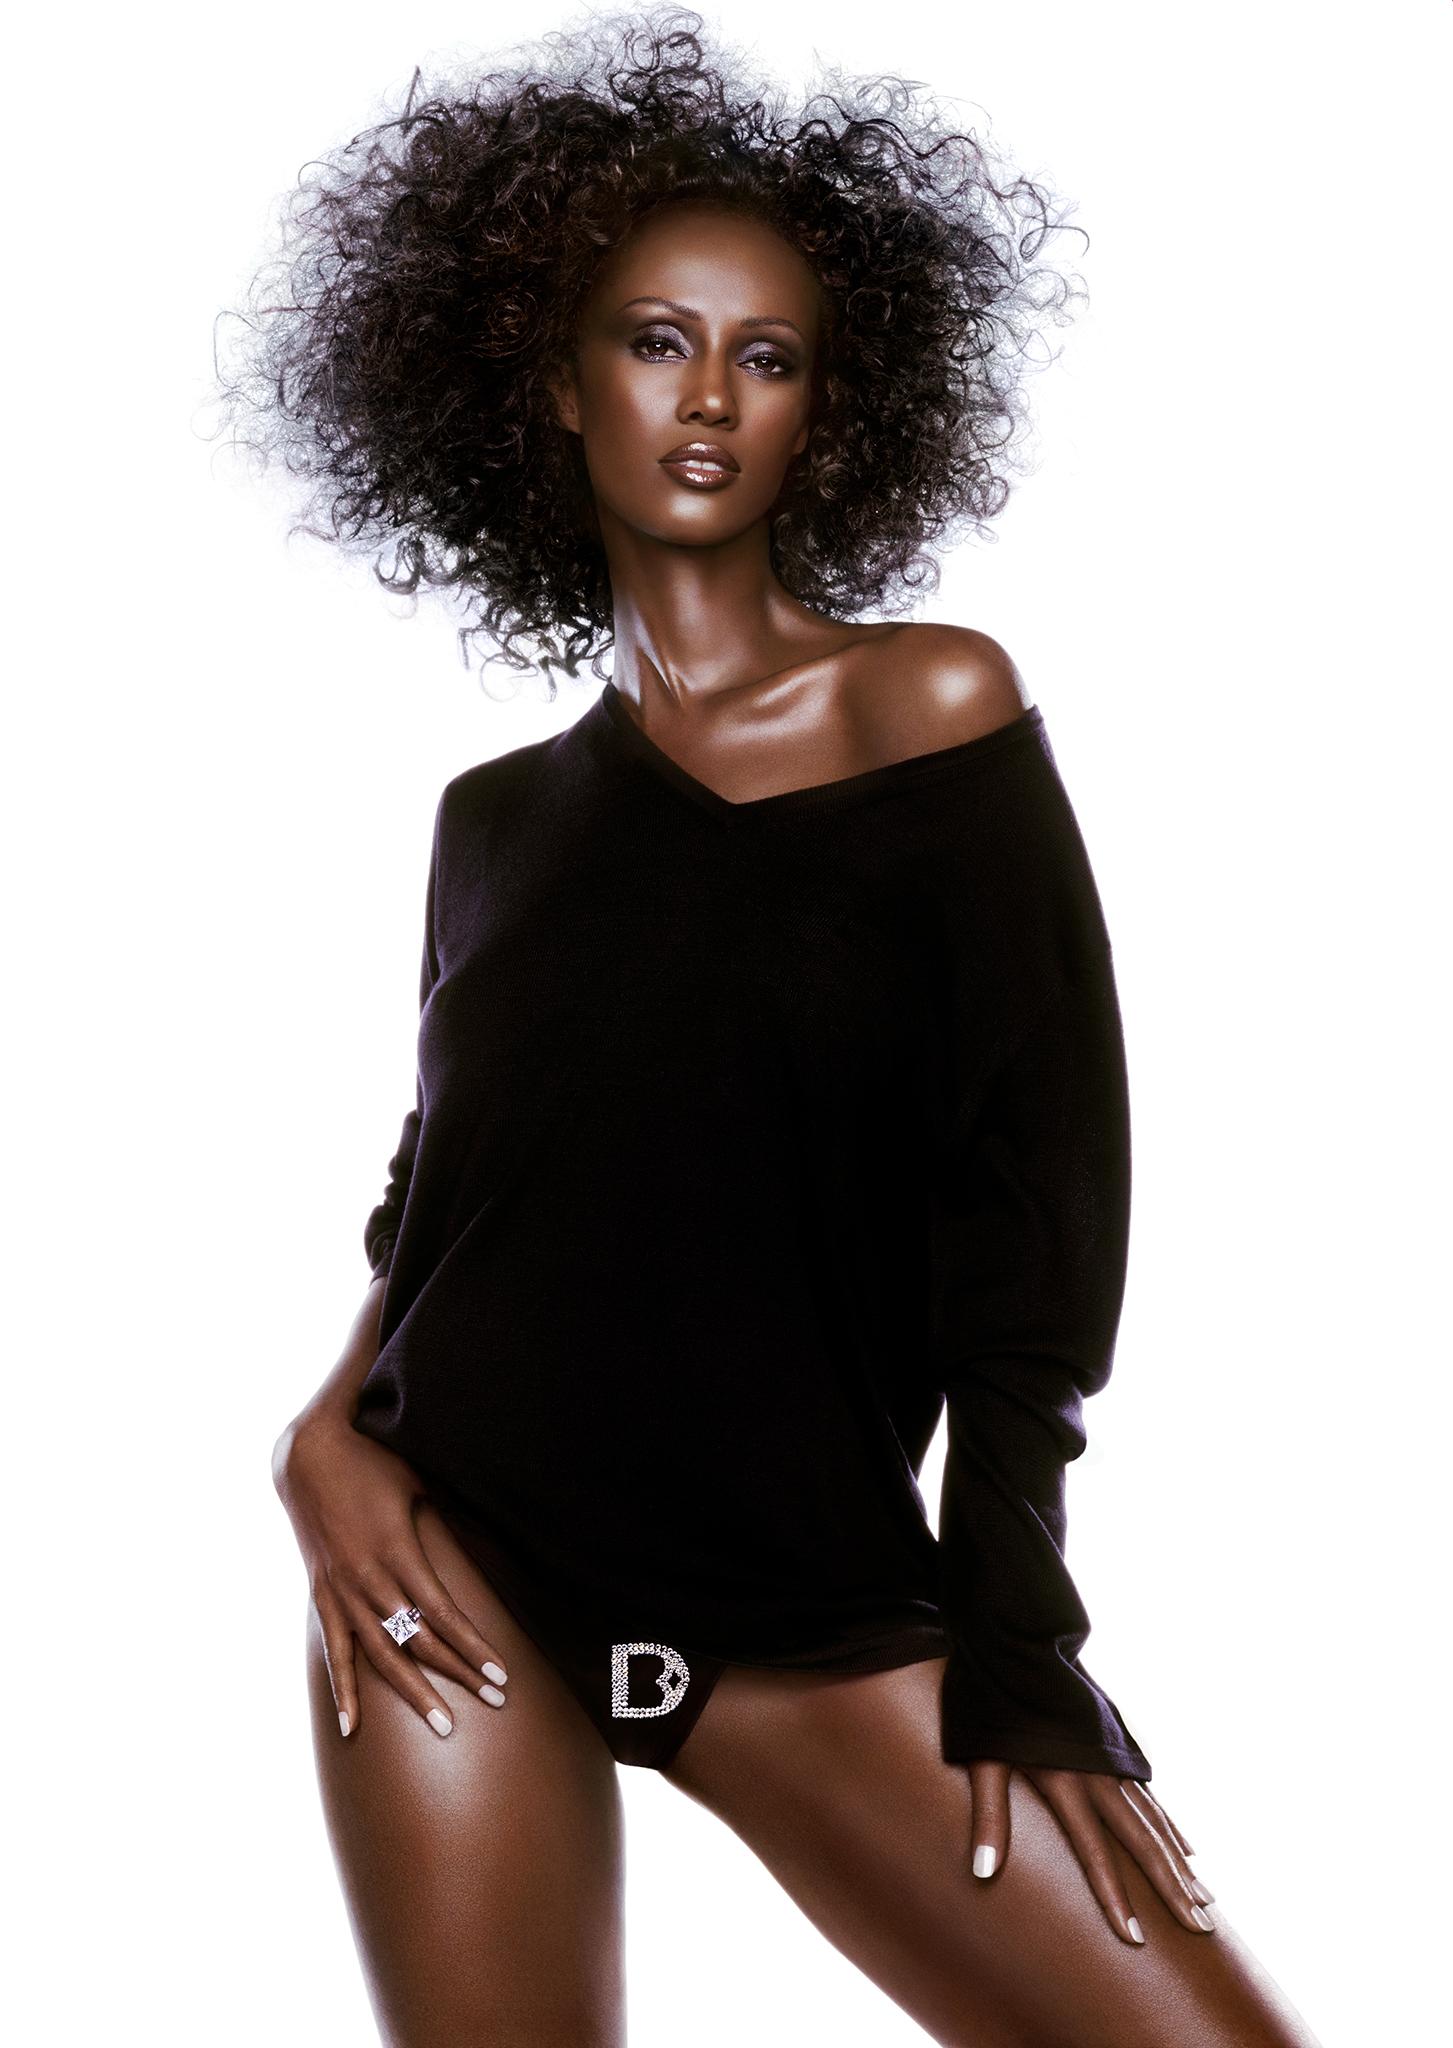 Museum quality fine art print of Iman, titled "Divine" by photographer Markus Klinko taken in New York, 2003

This print is available in the following sizes, signed and numbered by Markus Klinko
24" high - Edition 50
40" high - Edition 25
60" high -